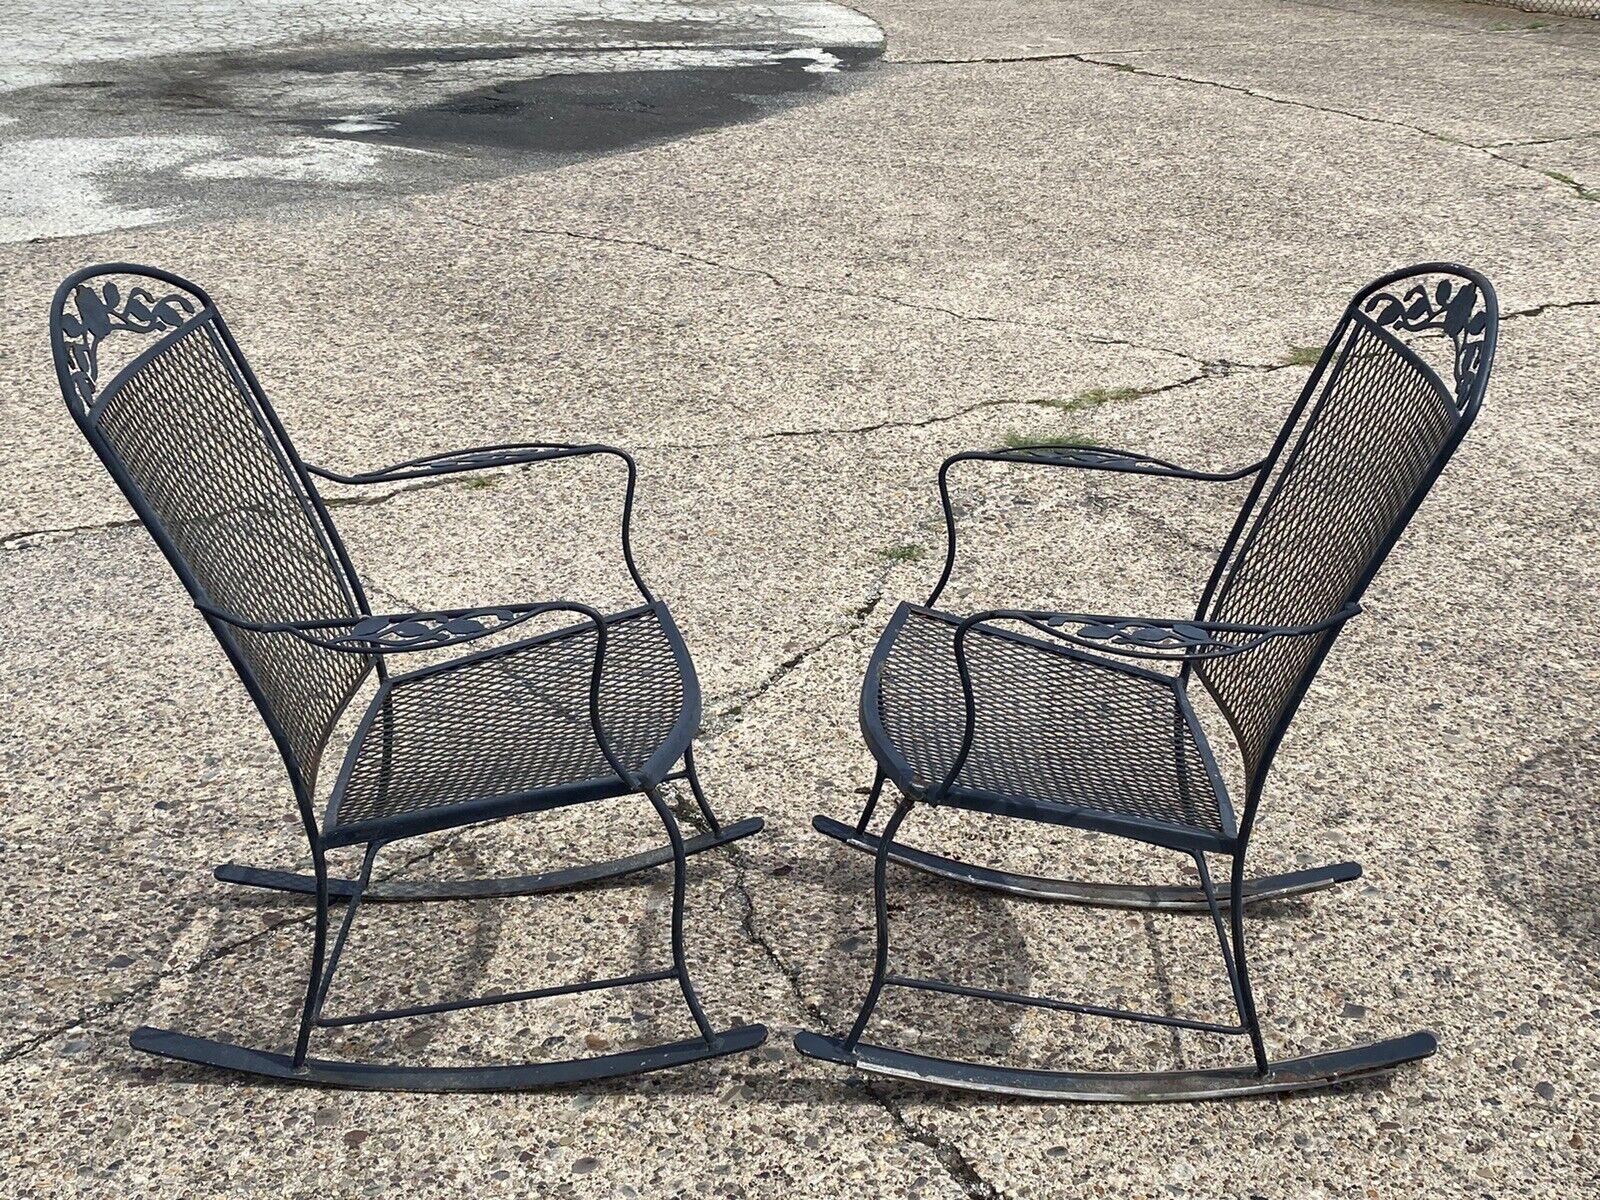 Vintage Wrought Iron Victorian Style Garden Patio Rocker Rocking Chairs - a Pair 2